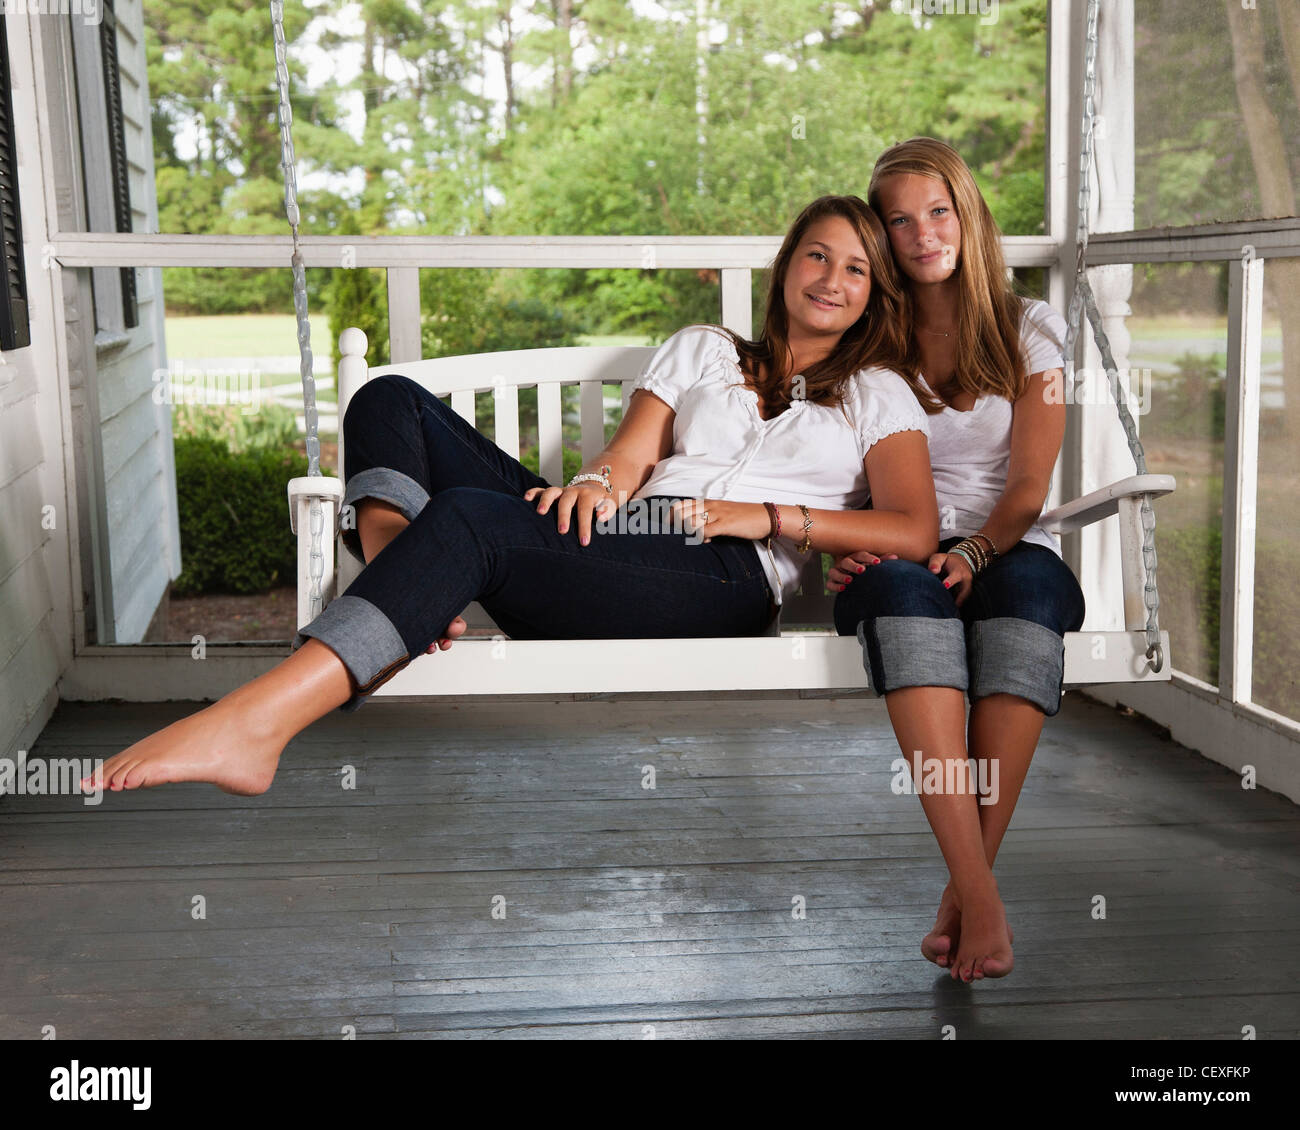 Young sisters sitting on porch swing ensemble Banque D'Images